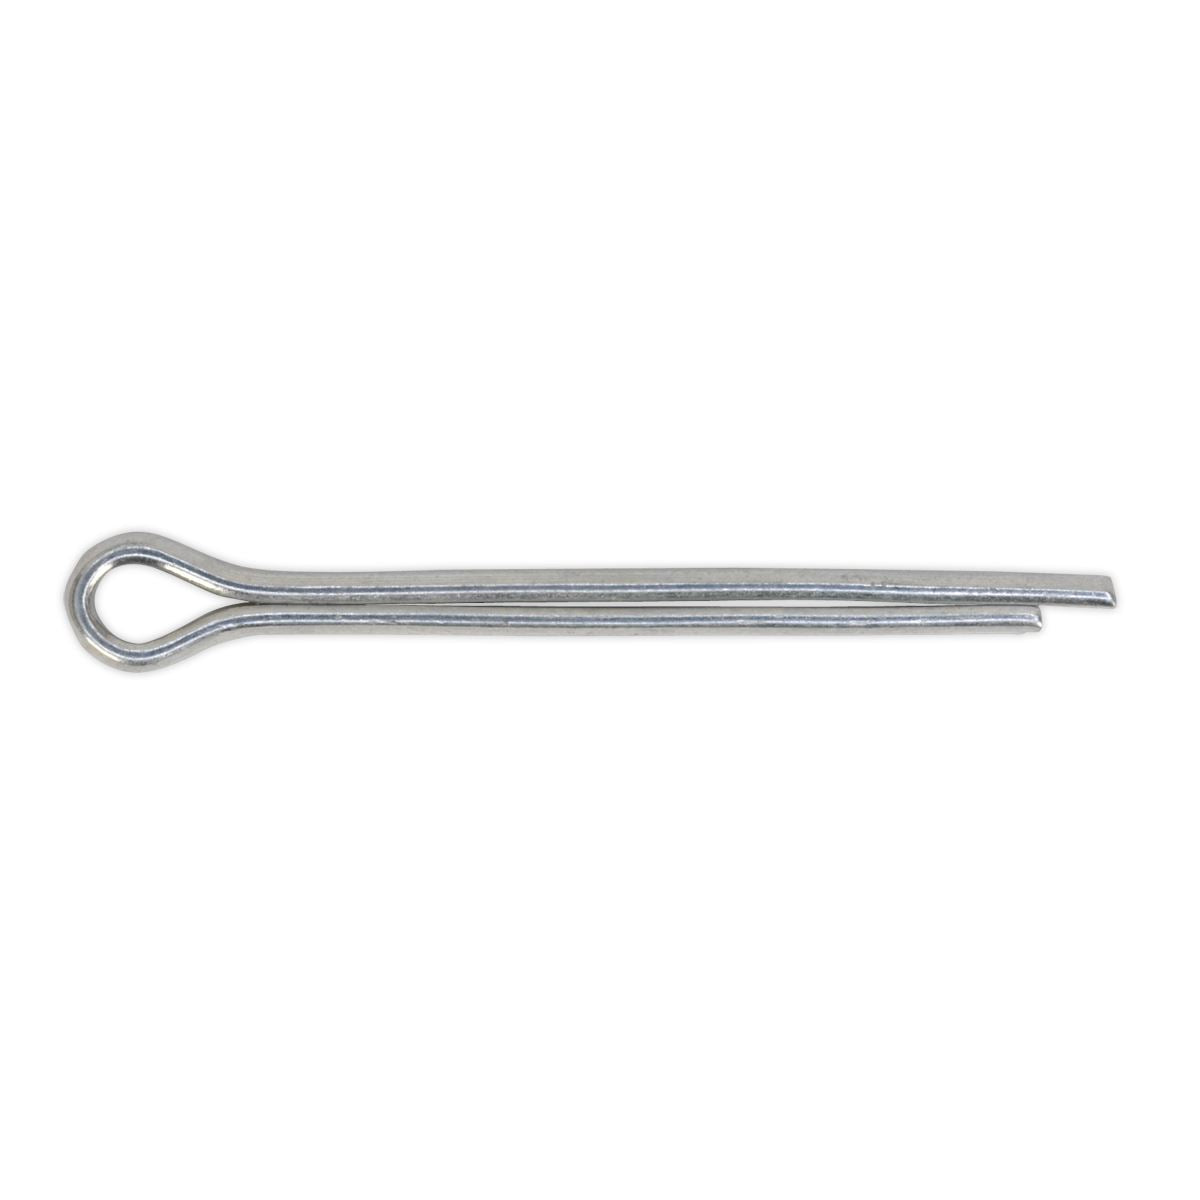 Sealey Split Pin 2.4 x 38mm Pack of 100